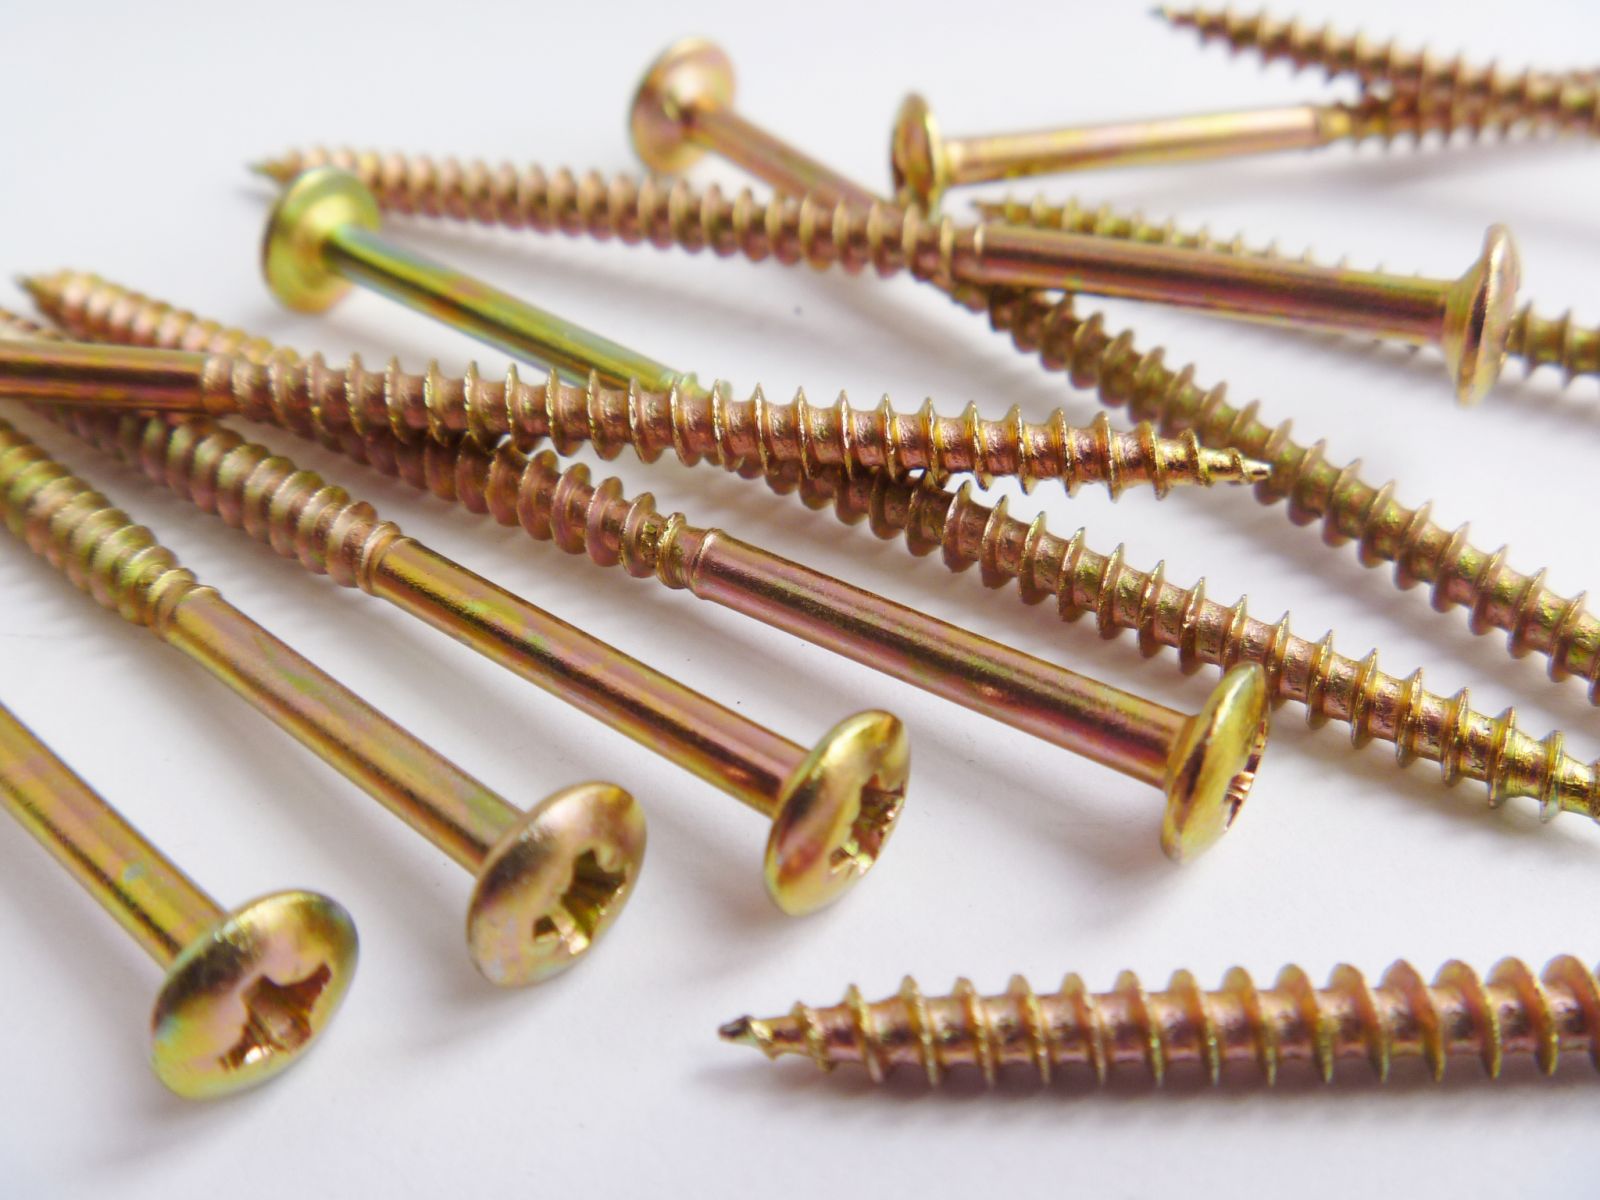 Summary of commonly used screws and how to classify them